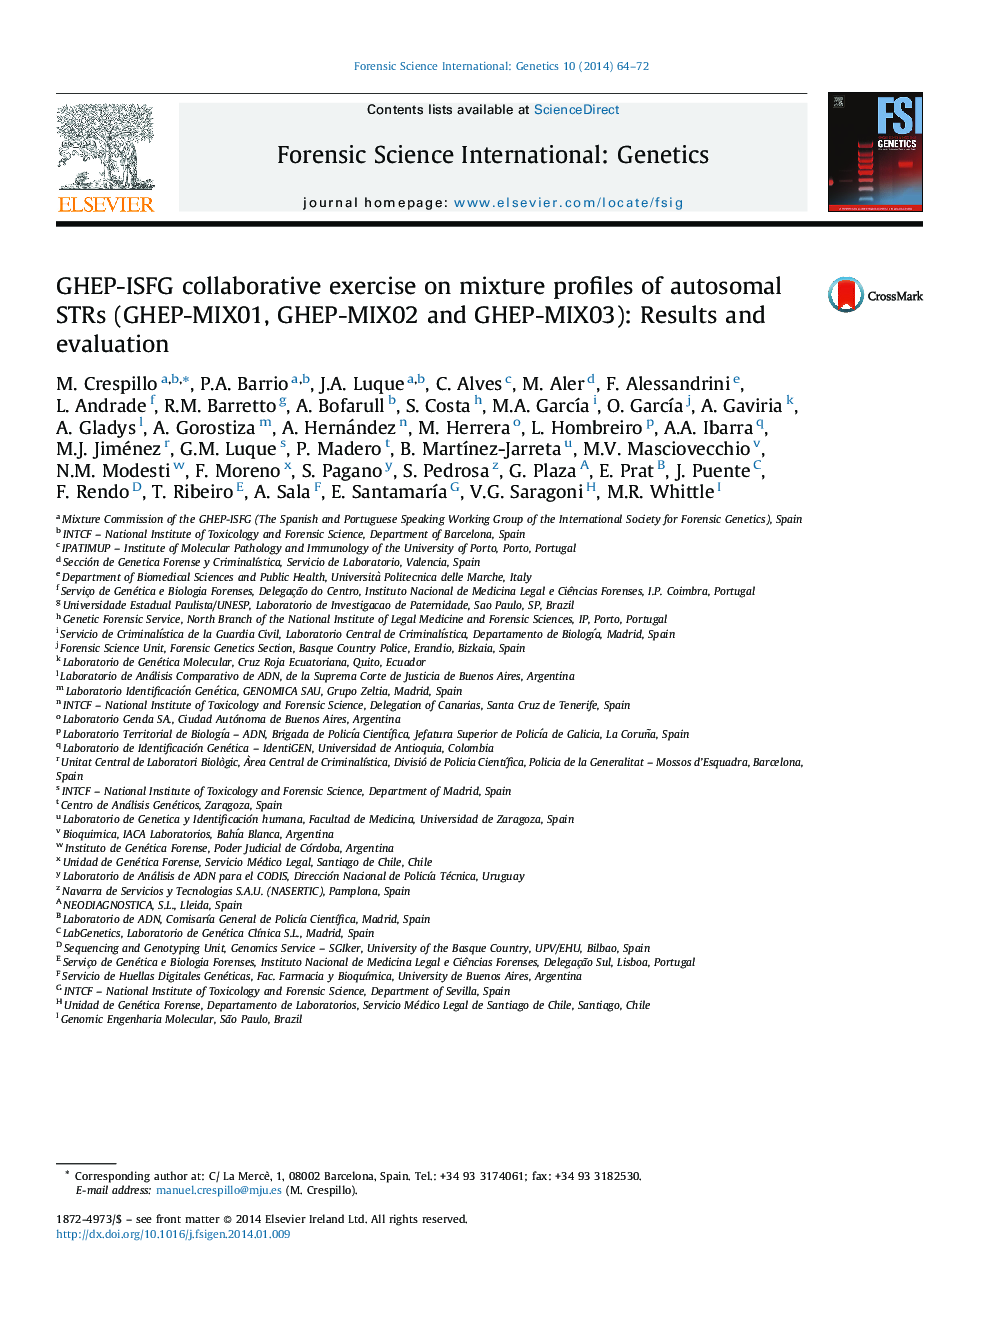 GHEP-ISFG collaborative exercise on mixture profiles of autosomal STRs (GHEP-MIX01, GHEP-MIX02 and GHEP-MIX03): Results and evaluation